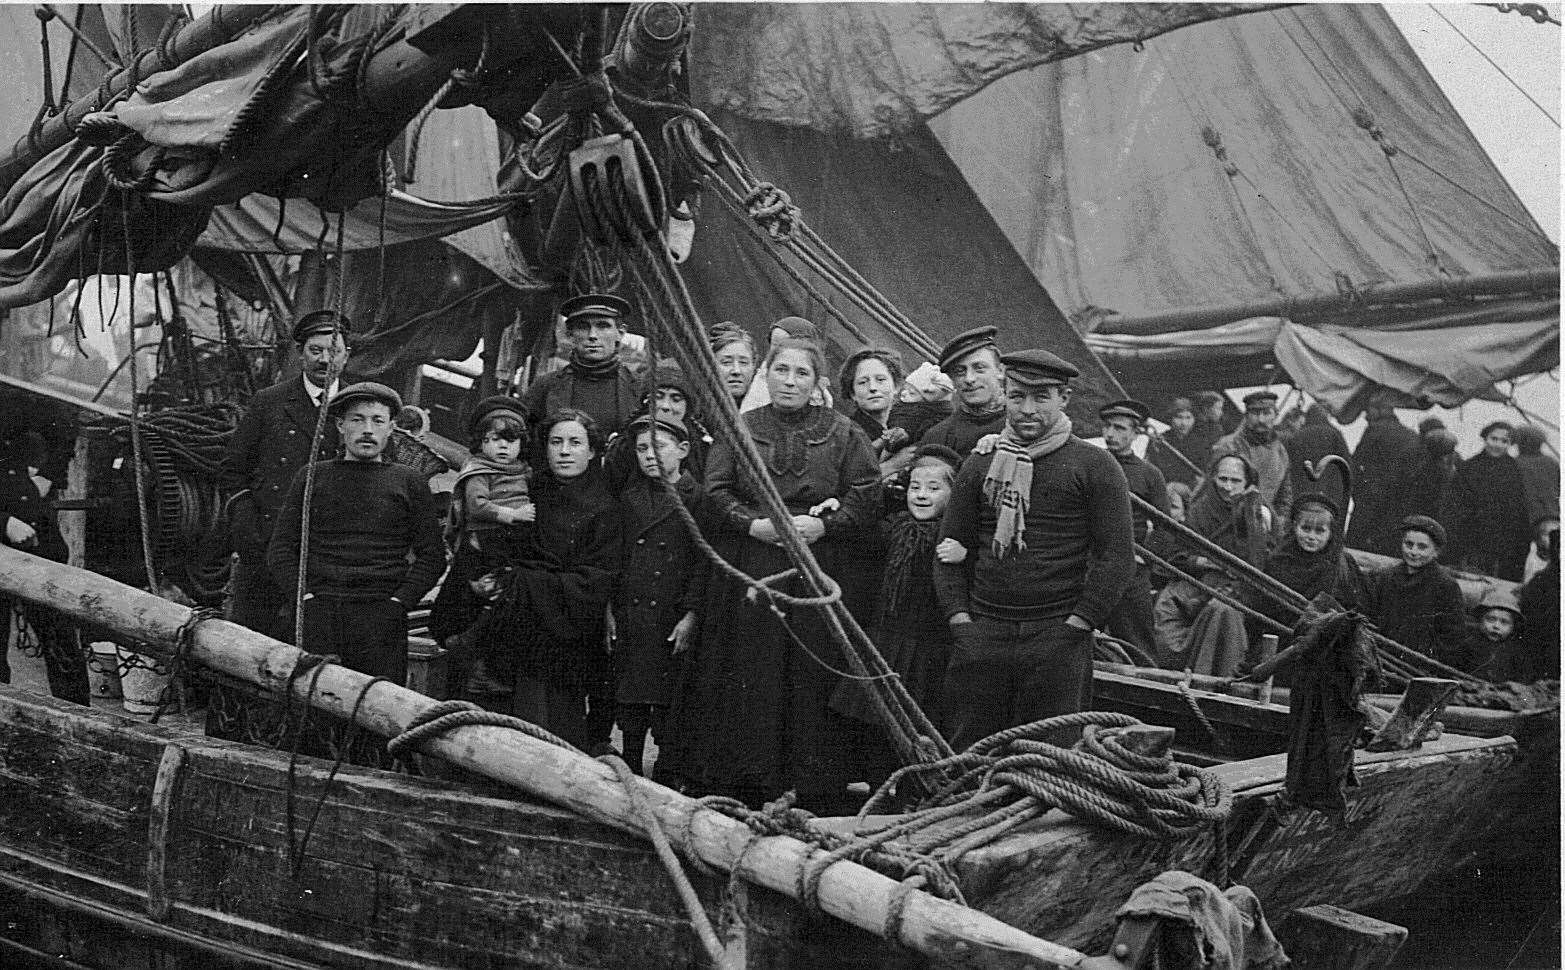 Belgian refugees in the inner harbour at Folkestone - homes on the site of the department store were used to accommodate many. Picture: Alan Taylor, Folkestone & District Local History Society.